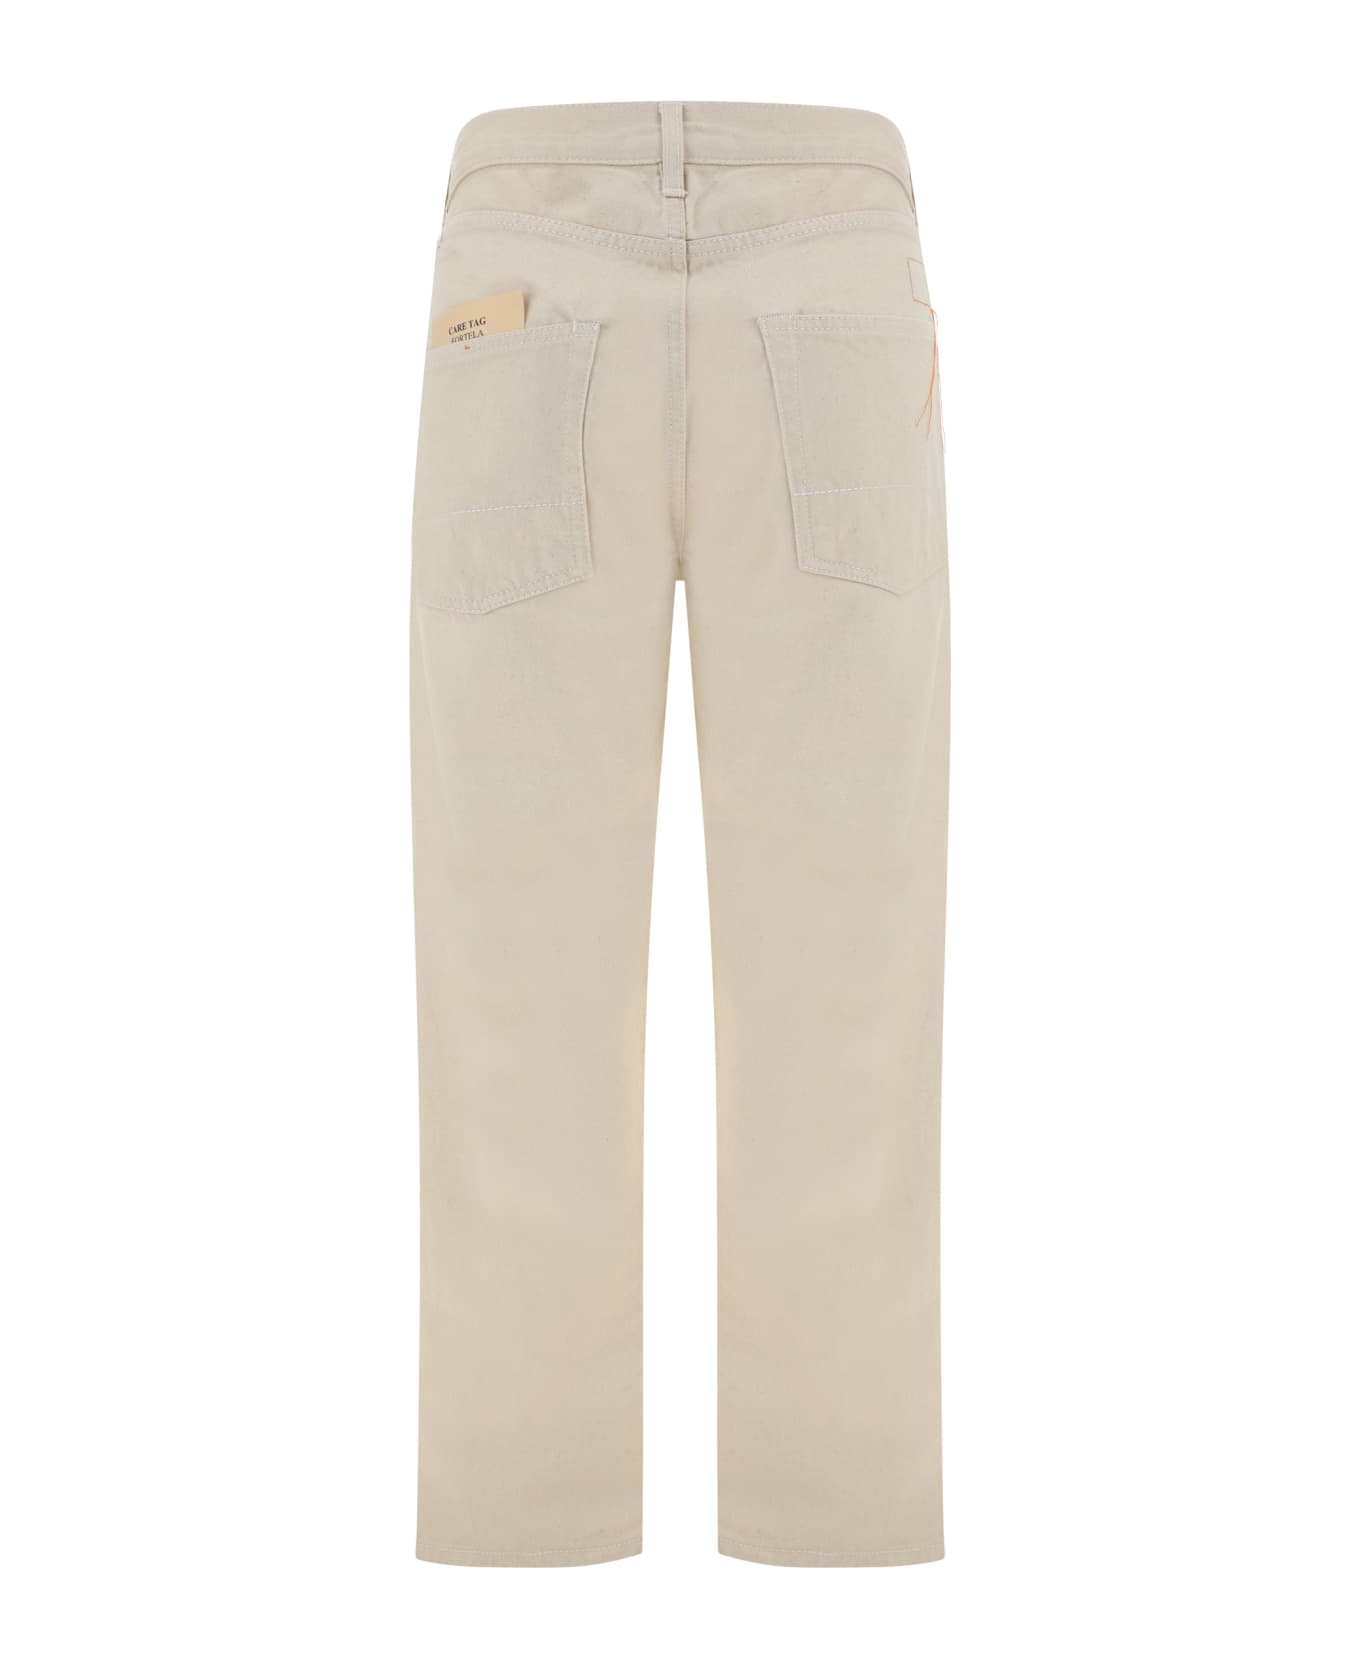 Fortela Jeans - Off White ボトムス